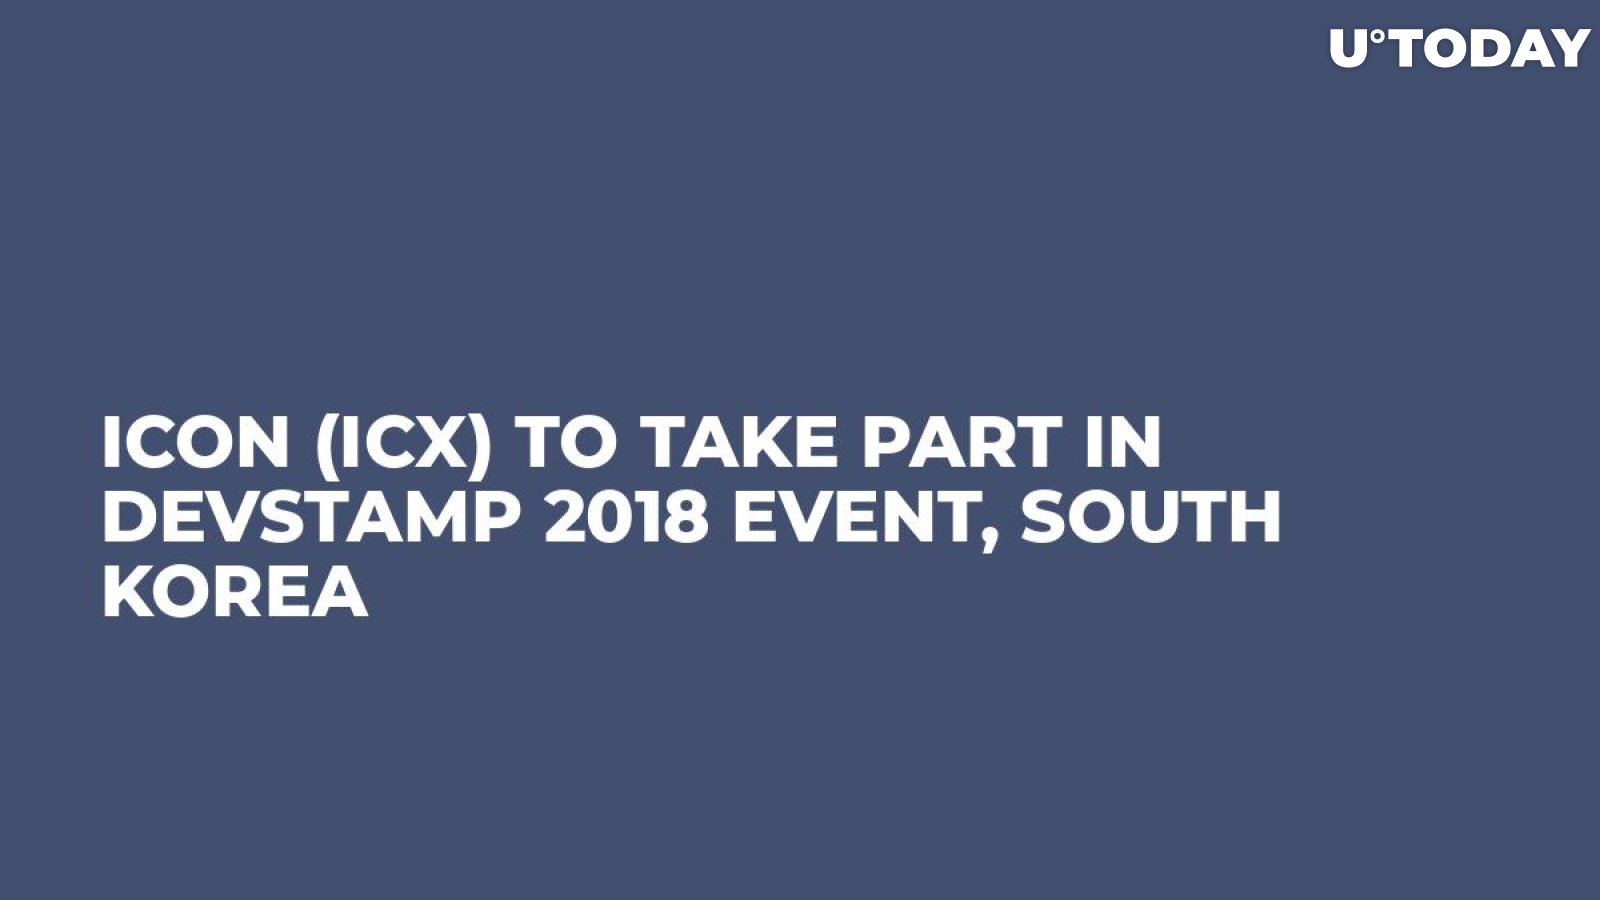 ICON (ICX) To Take Part in DevStamp 2018 Event, South Korea